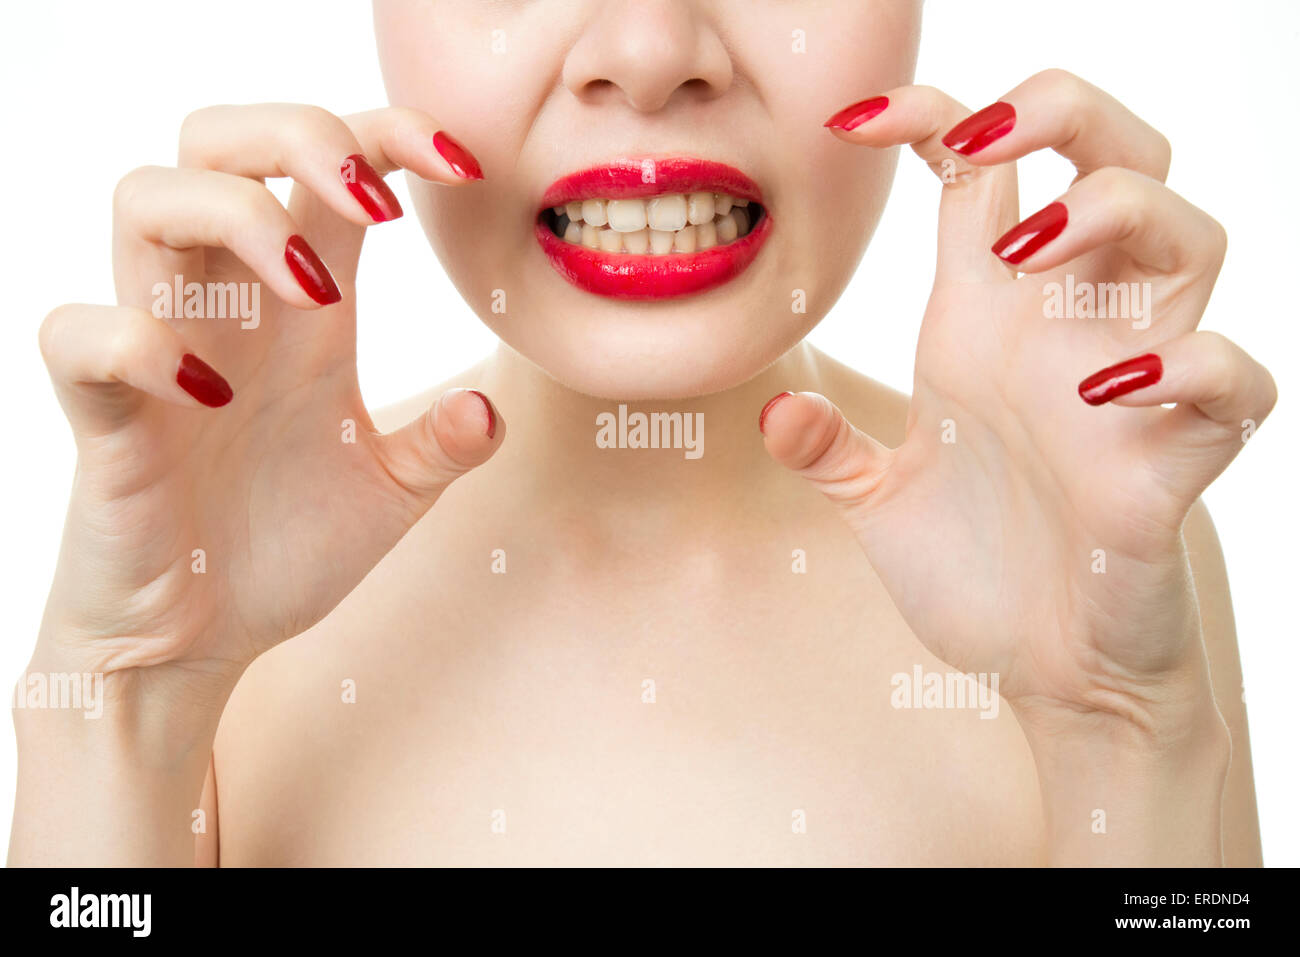 crazy Berserk Woman hand red lips mouth open Stock Photo